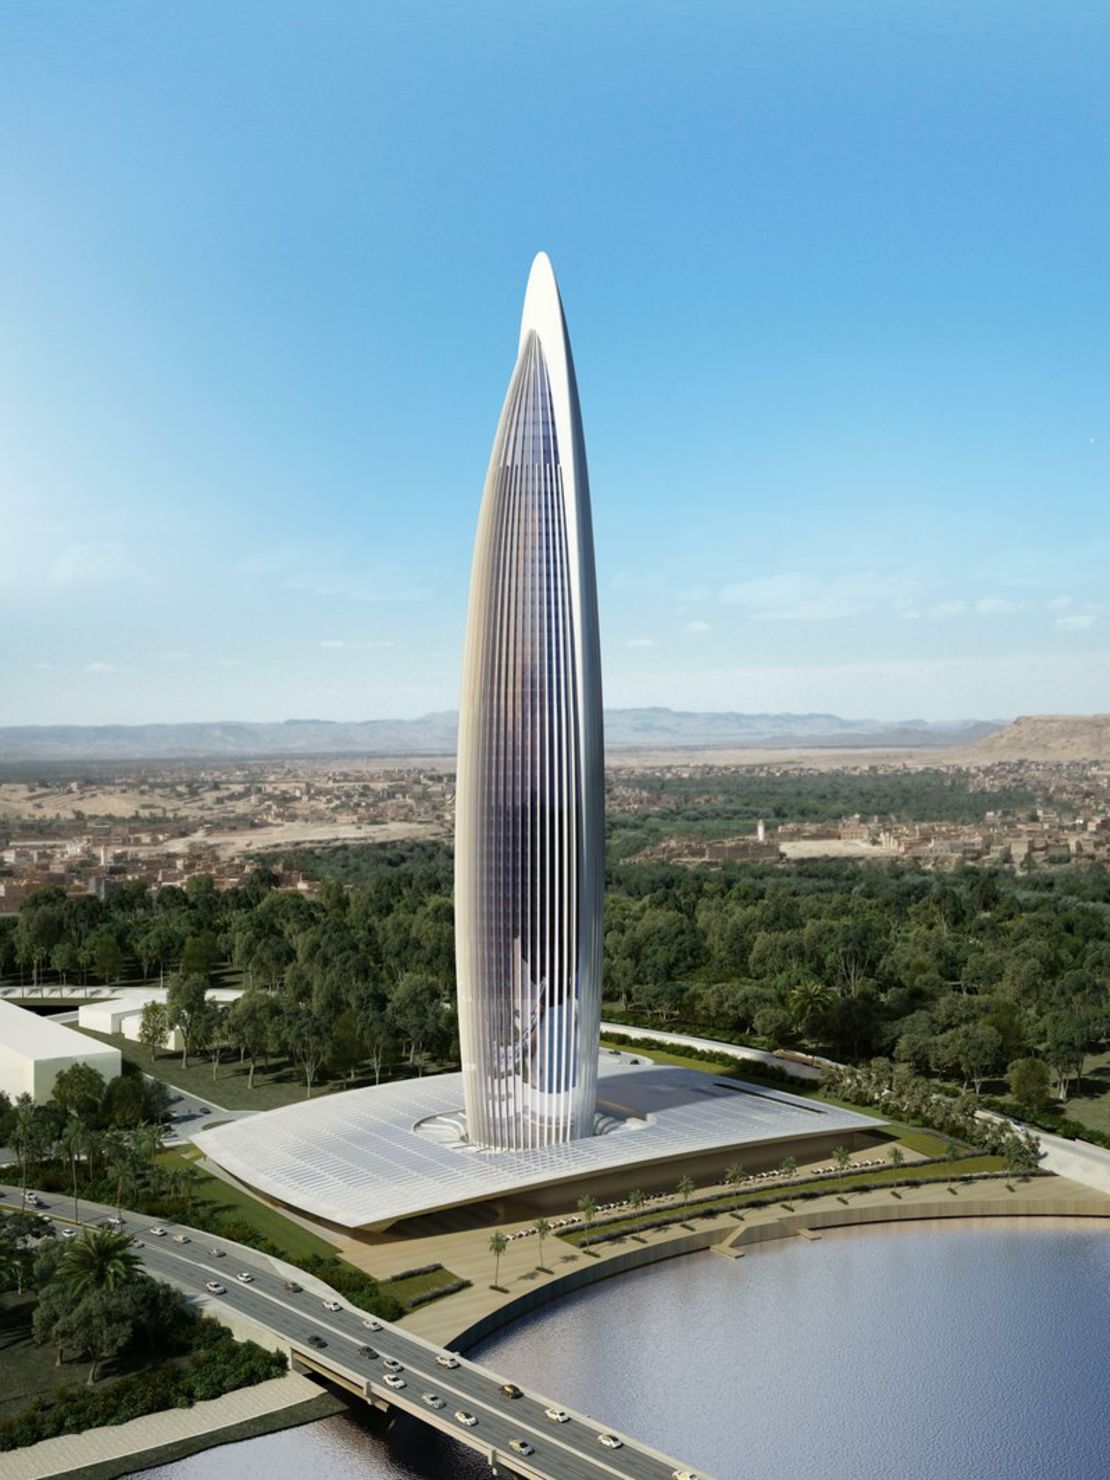 The Bank of Africa Tower was designed by architects Rafael de la Hoz and Hakim Benjelloun. 